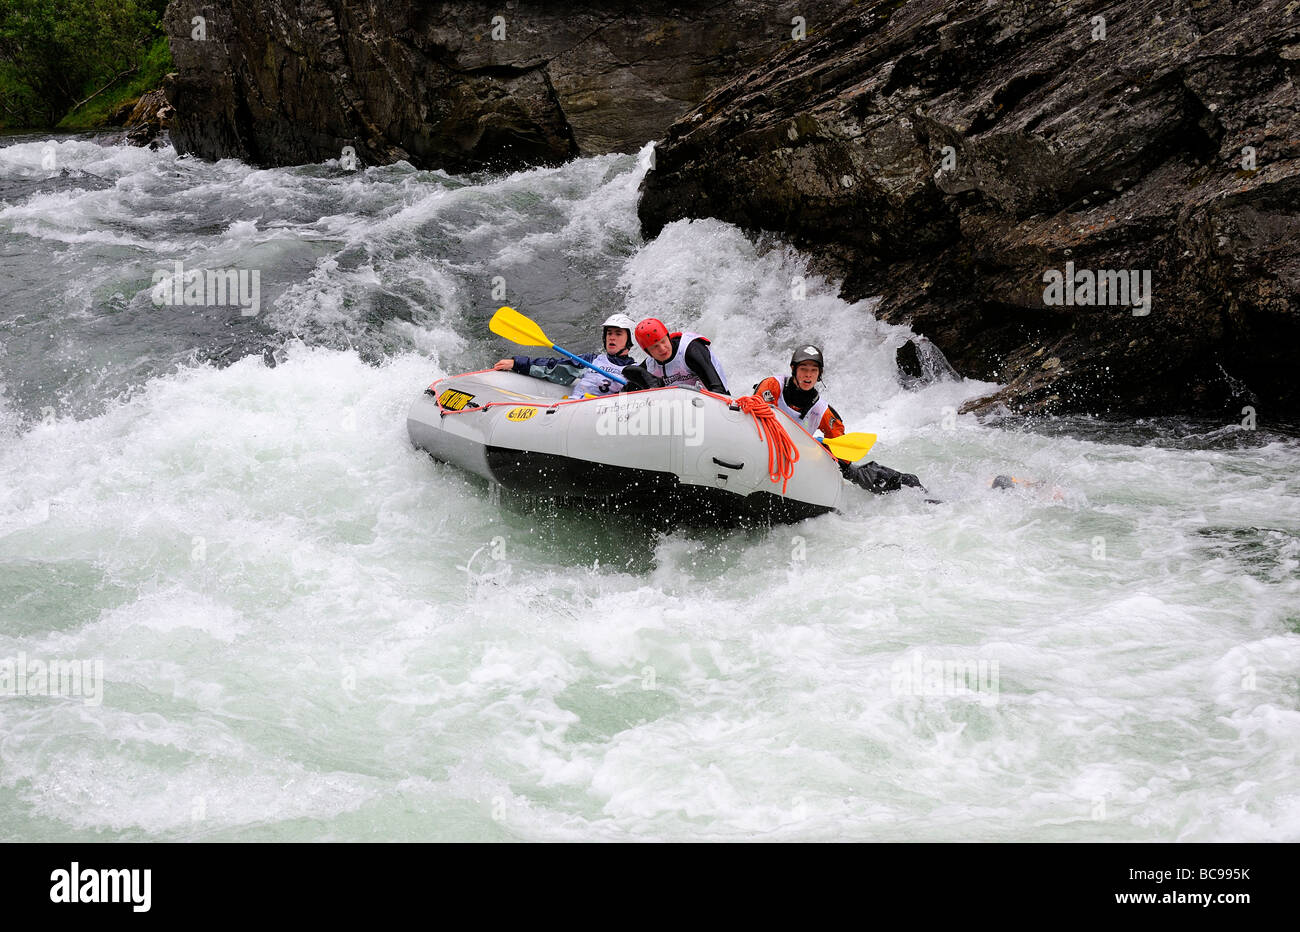 Rafting competition in white water river at Voss Norway Stock Photo